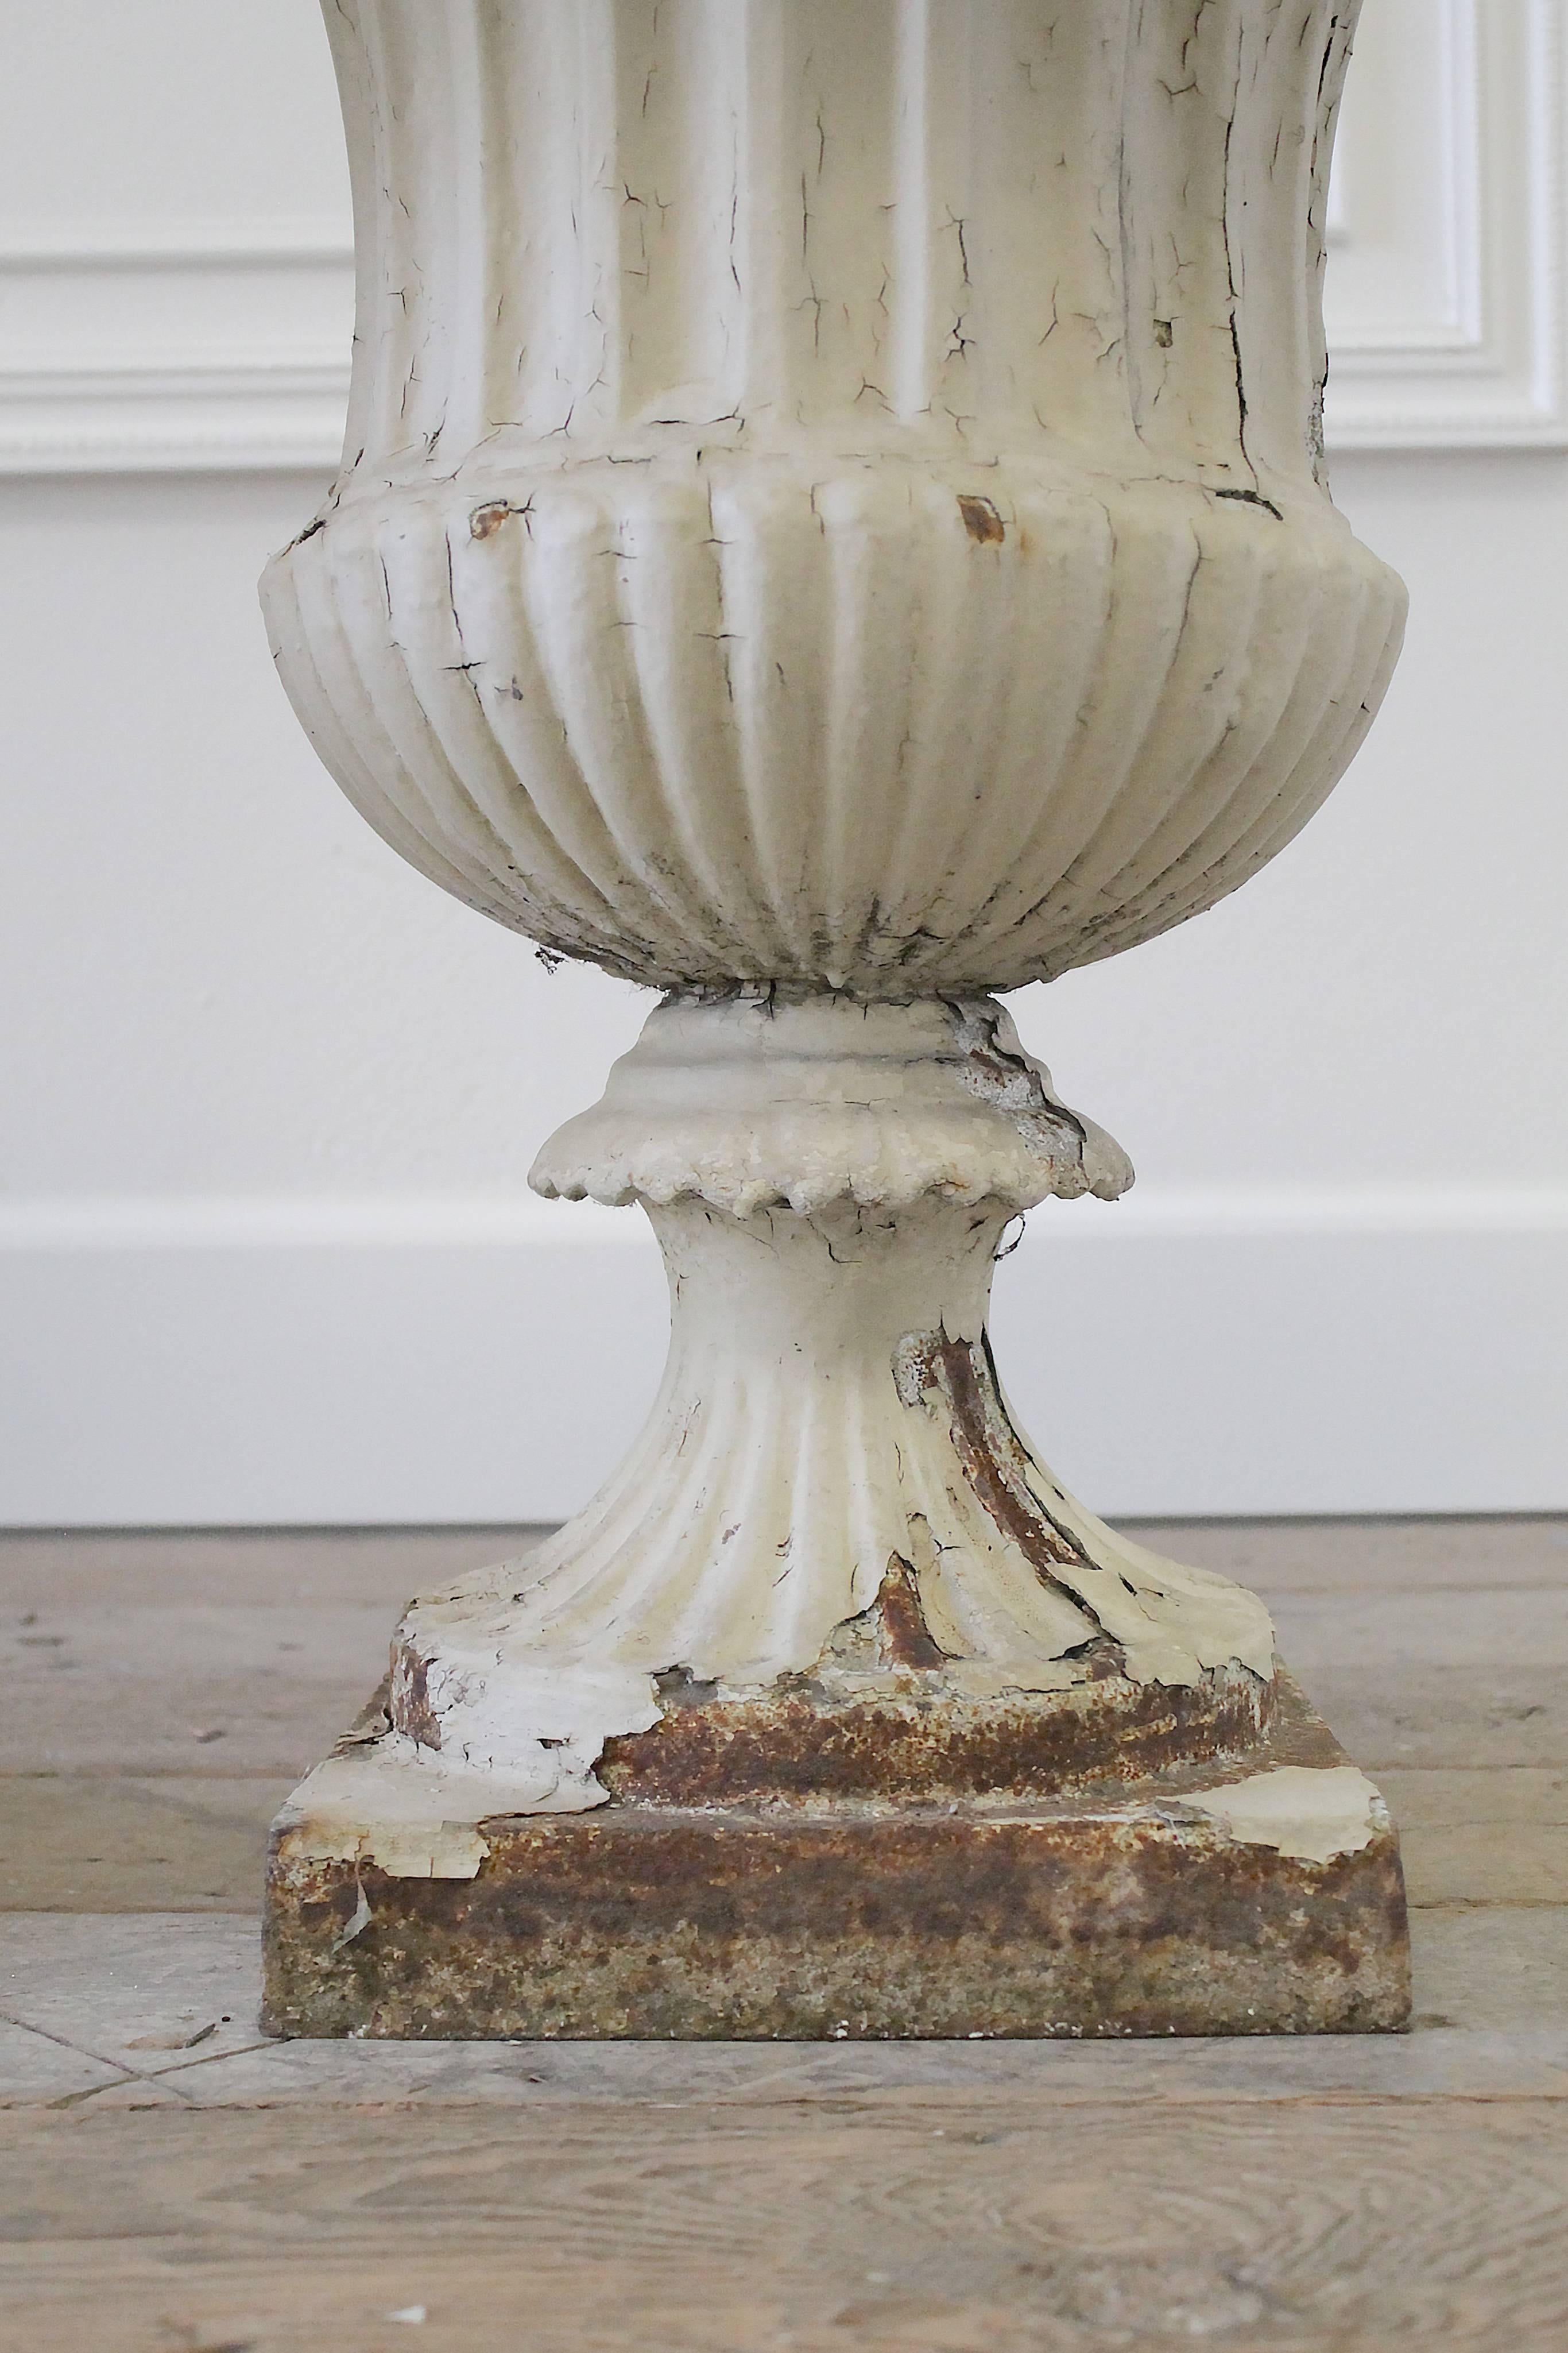 Beautiful urns with chipping creamy white paint. Lacy scalloped rim and fluted base. Urns are solid and heavy they do show signs of light rust at the bottom. Paint has a wonderful weathered look.
Measures: 17.5